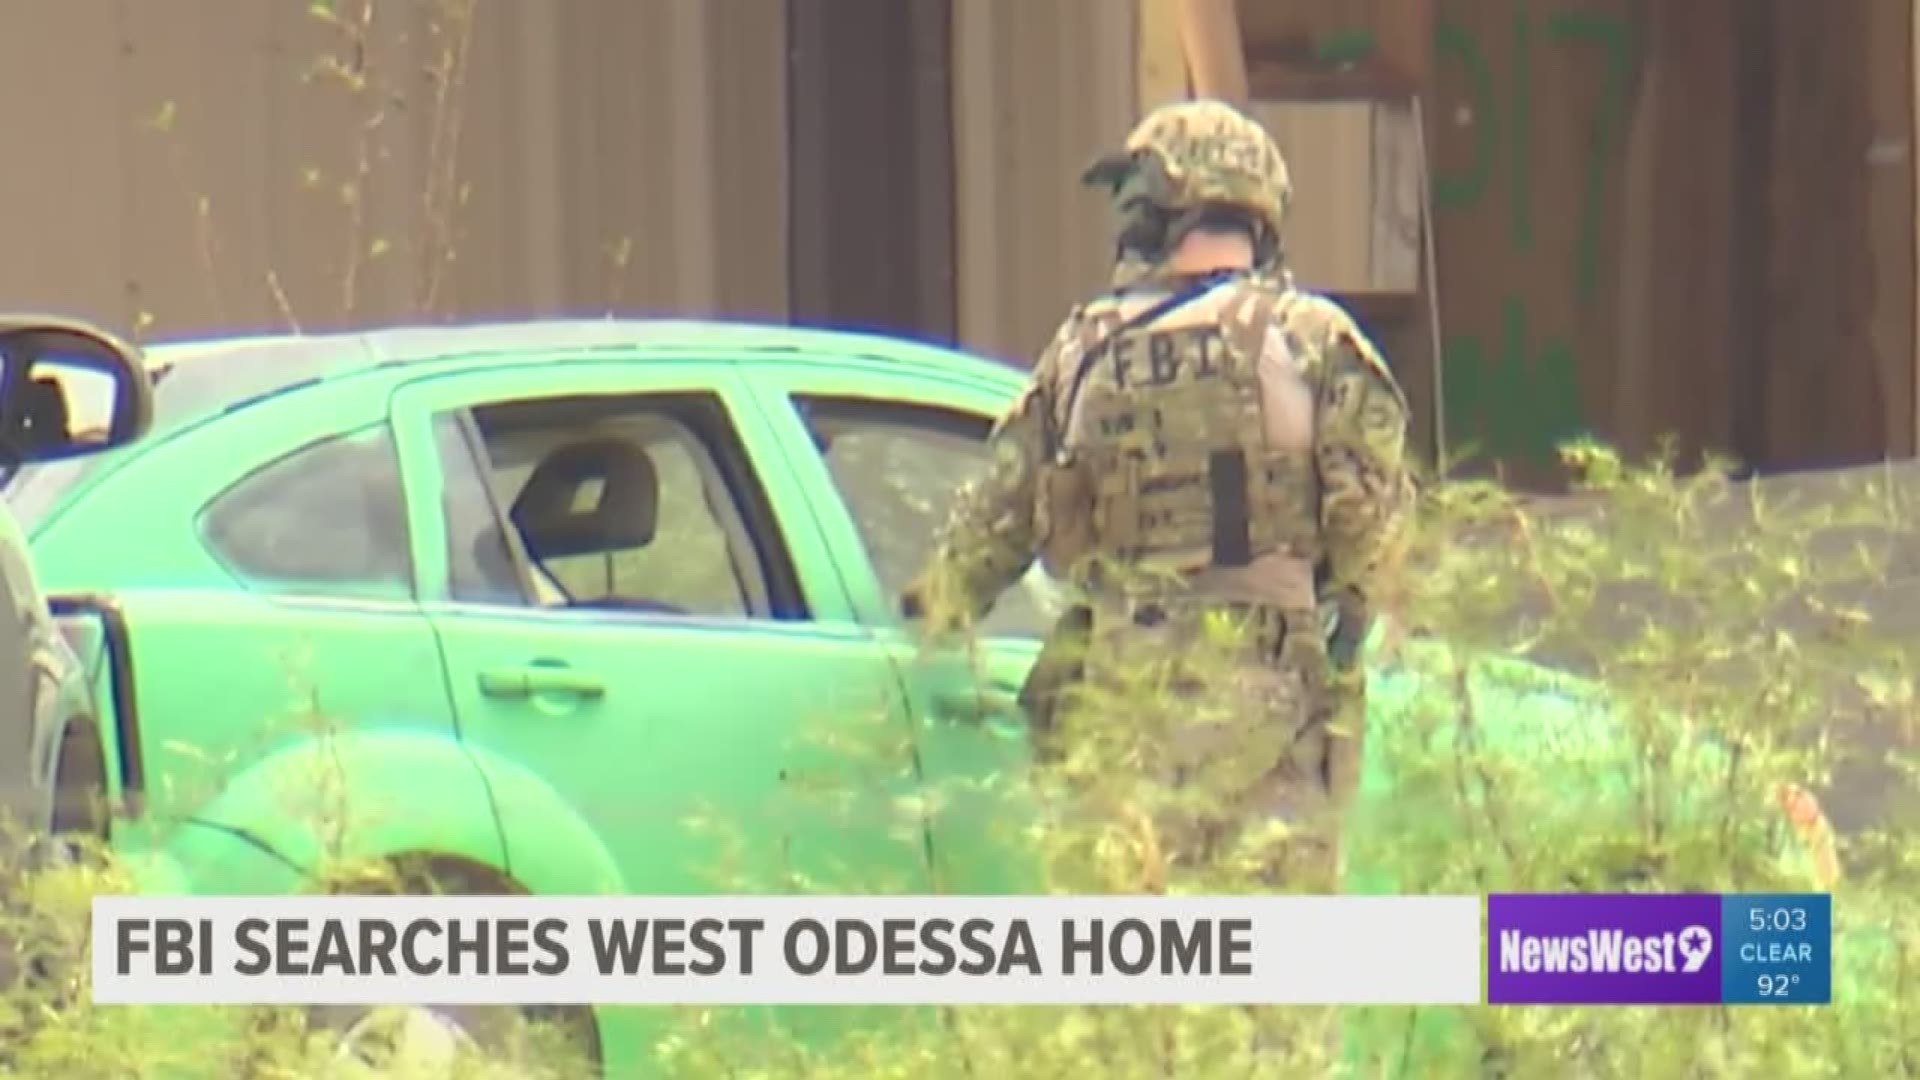 It was a tense scene at the west Texas home as federal agents shouted direction while serving a warrant.